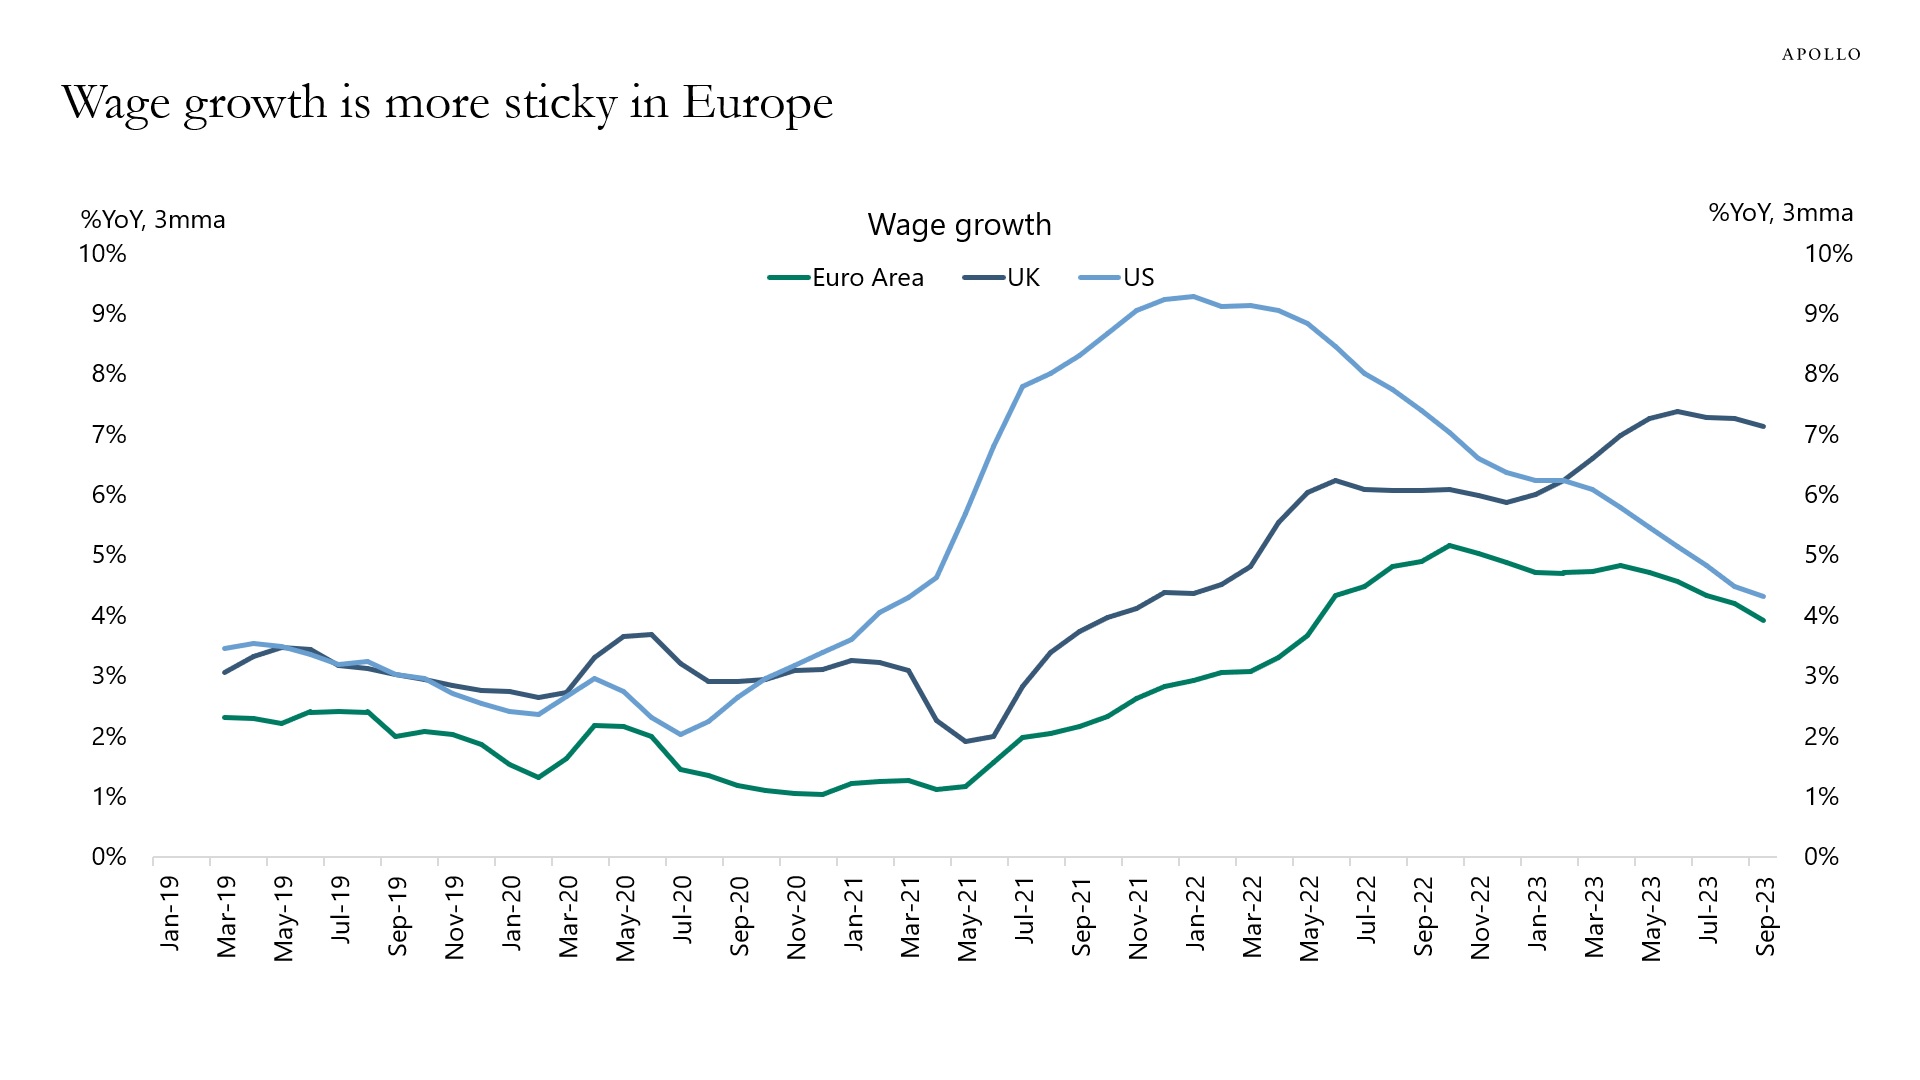 Wage growth is stickier in Europe